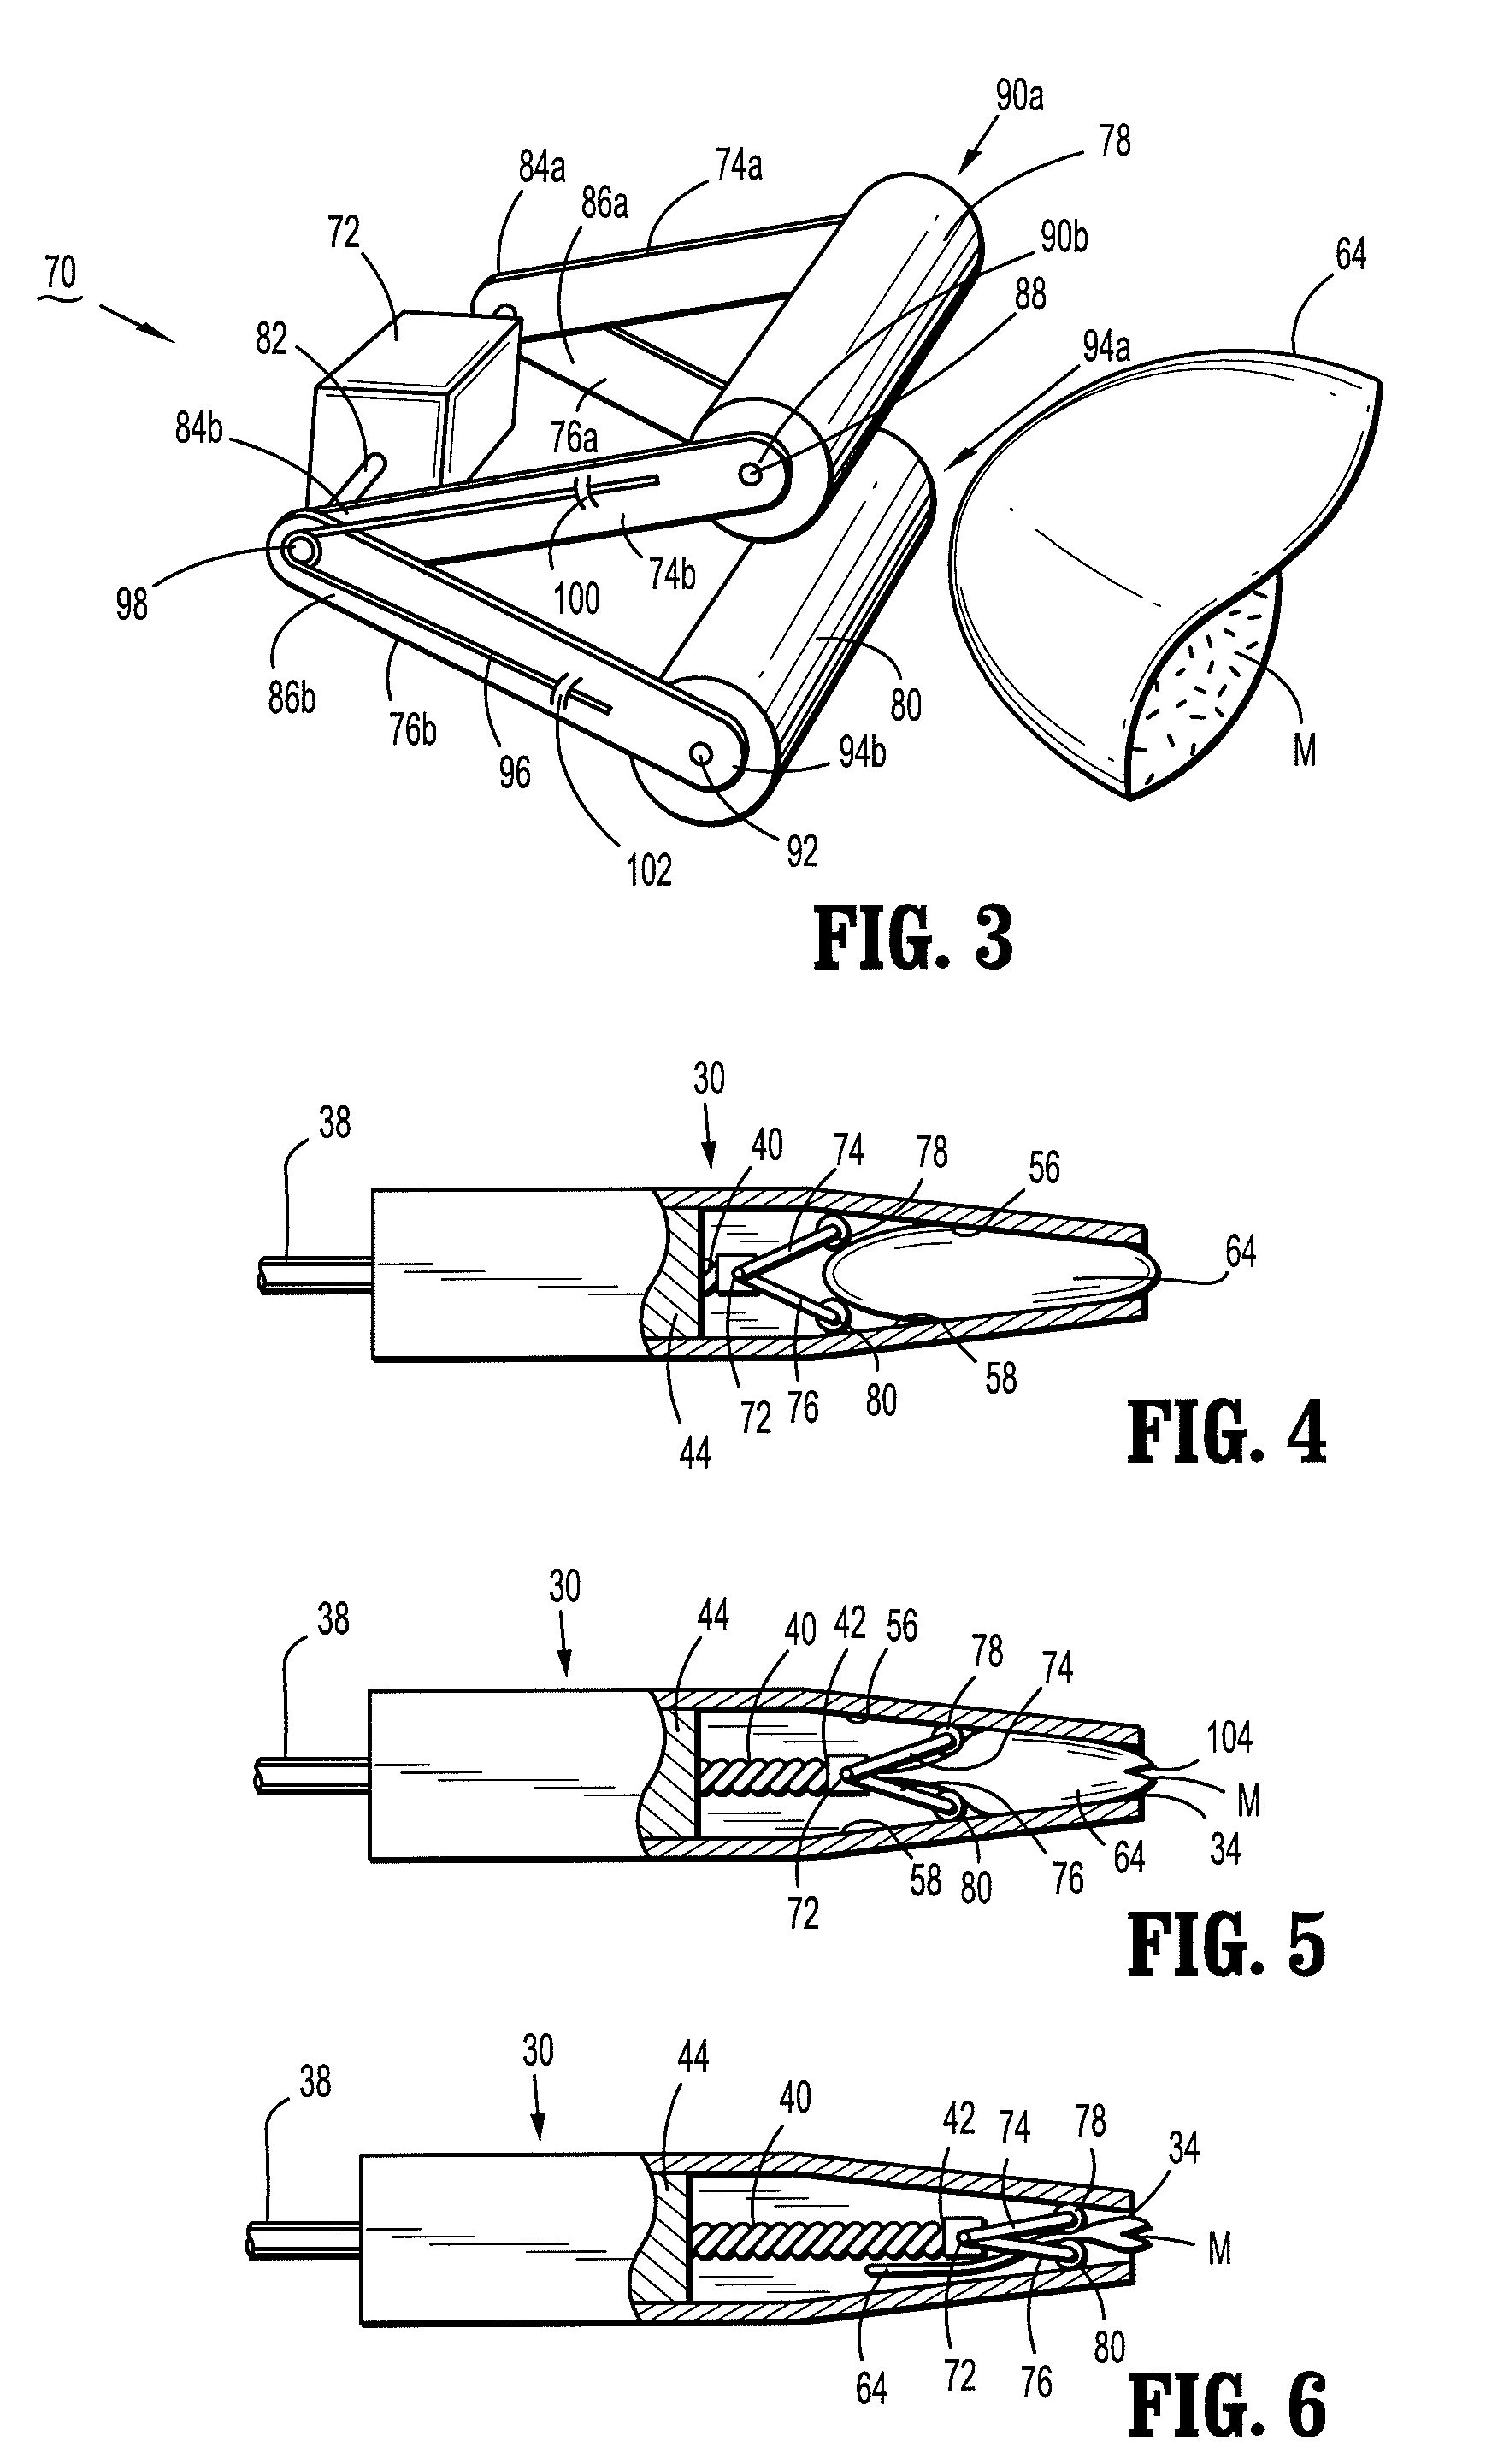 Stapler powered auxiliary device for injecting material between stapler jaws